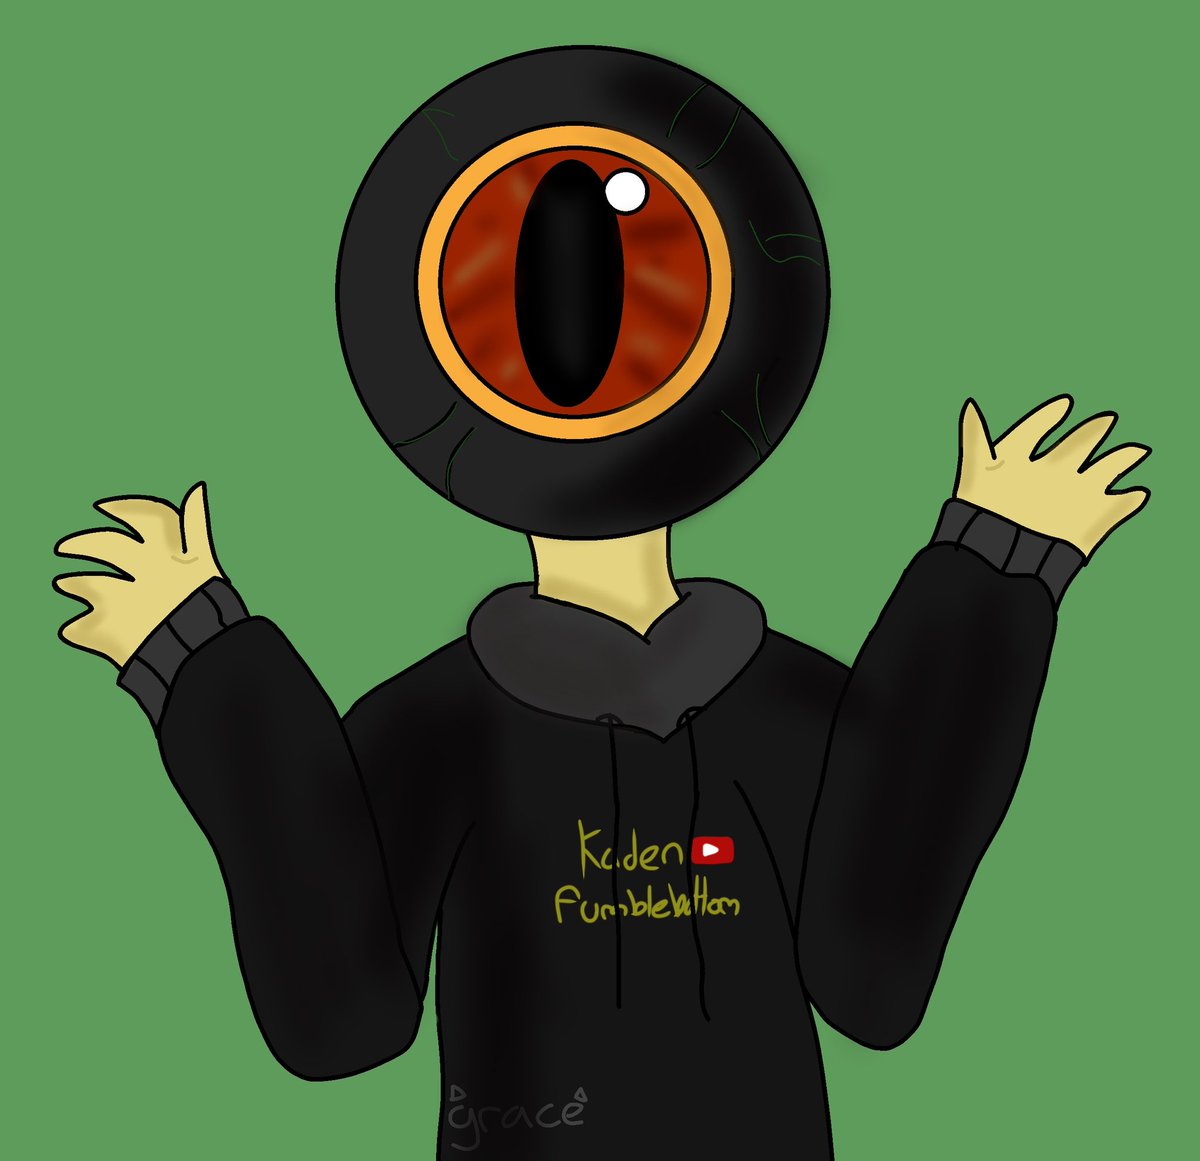 Is that a cool looking eyeball man with Roblox Kaden Fumblebottom merch?? 